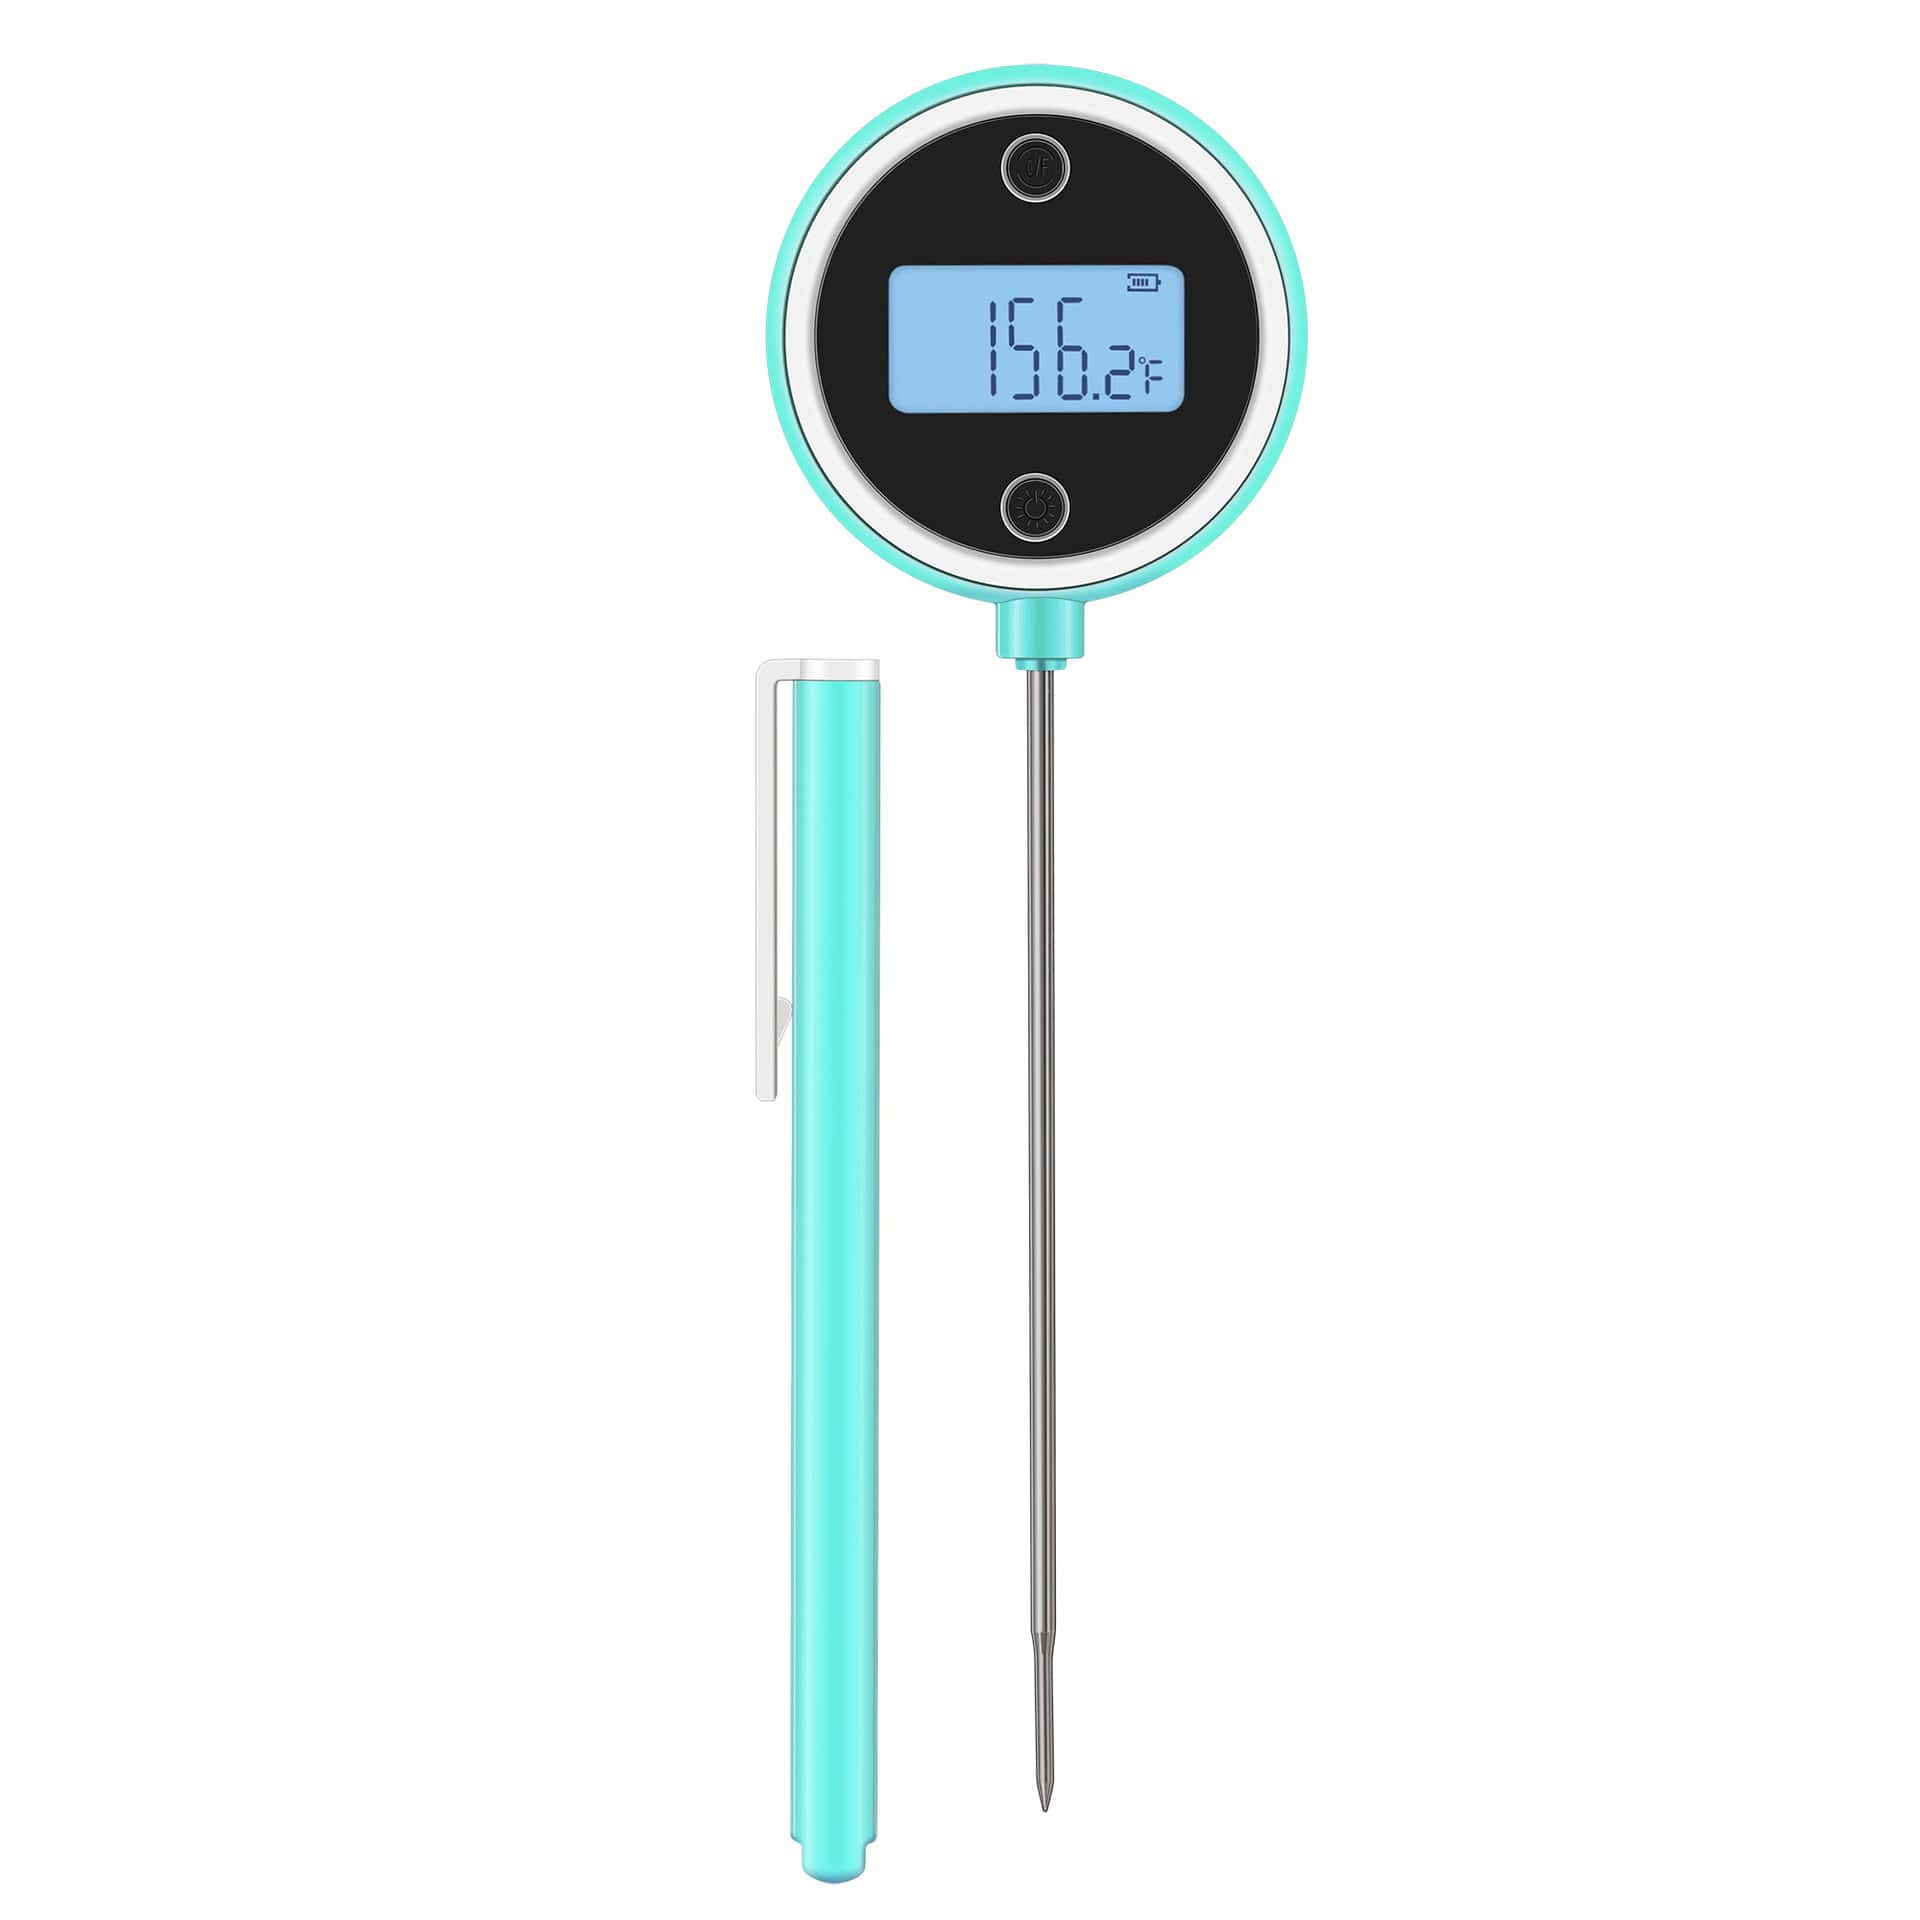 https://www.chefstemp.com/wp-content/uploads/2021/09/chefstemp-pocket-pro-cooking-thermometer-10.jpg